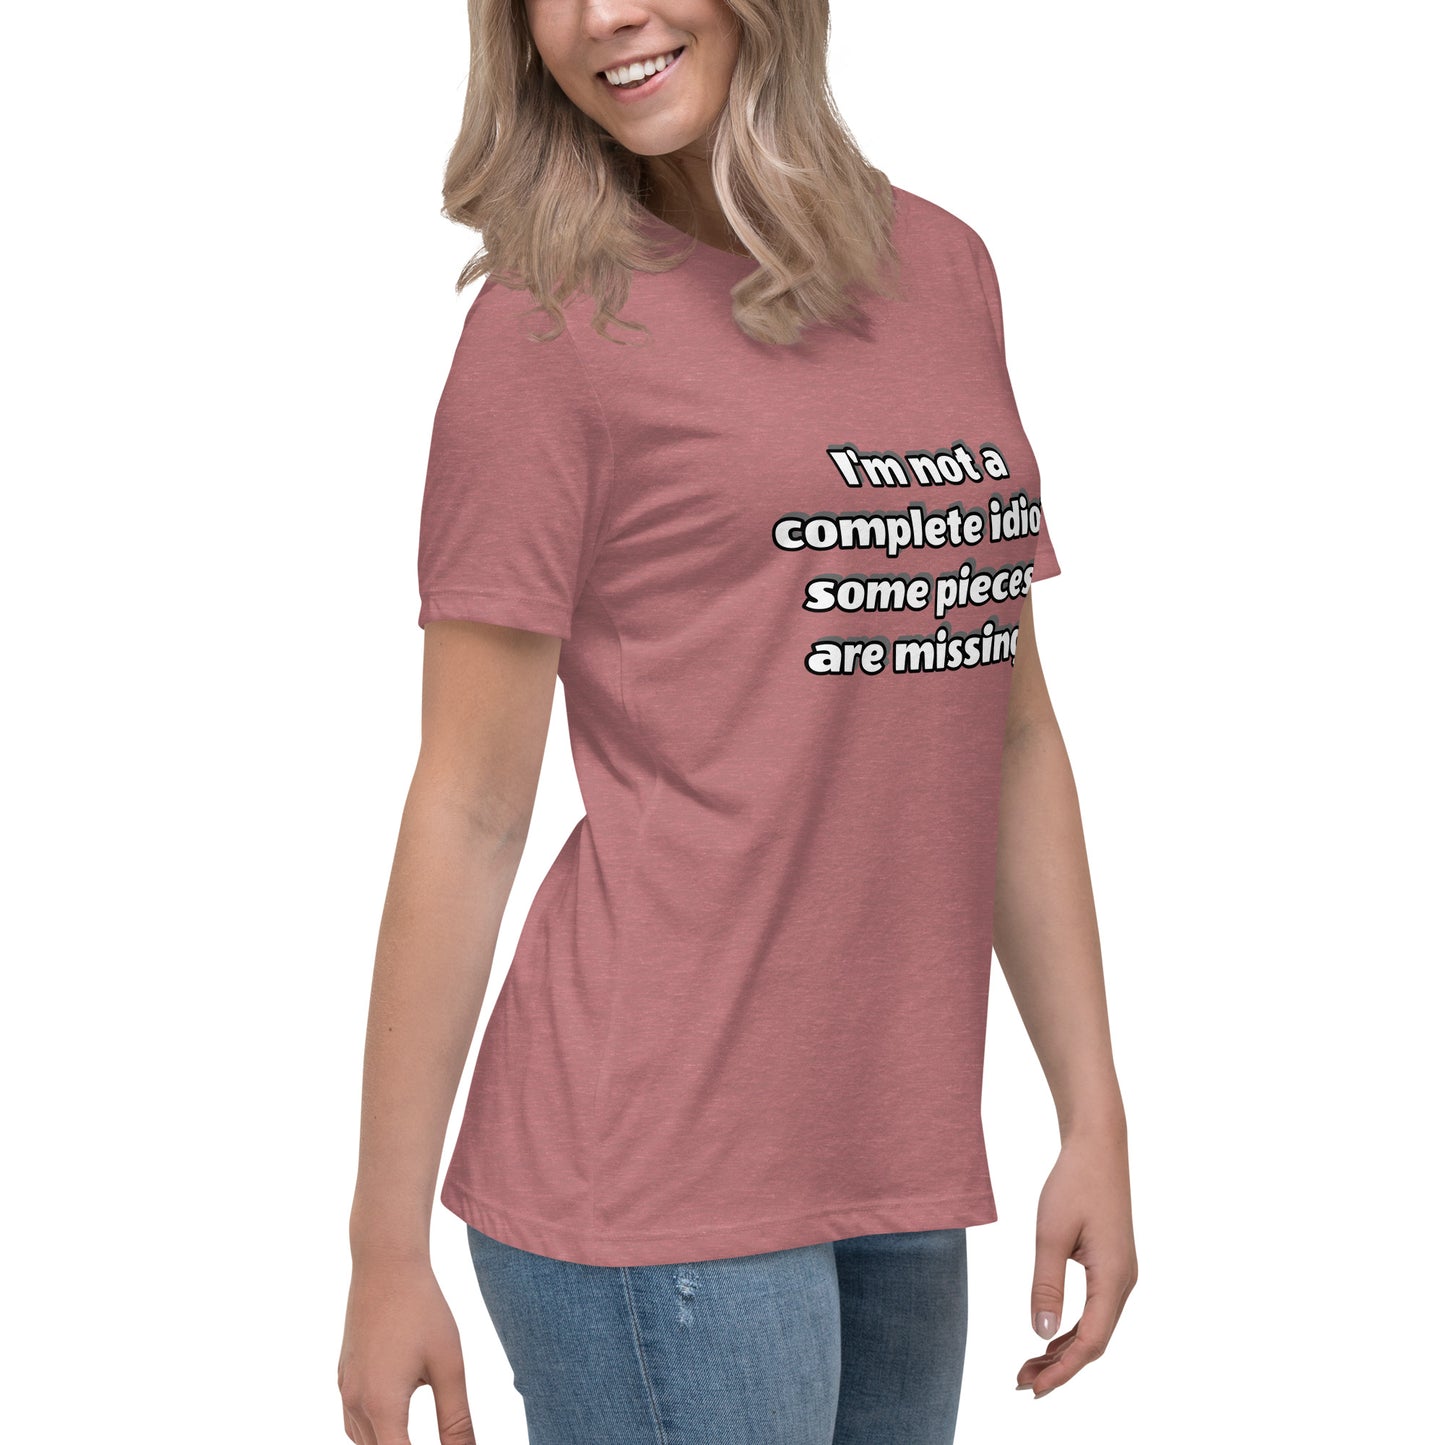 Women with mauve t-shirt with text “I’m not a complete idiot, some pieces are missing”